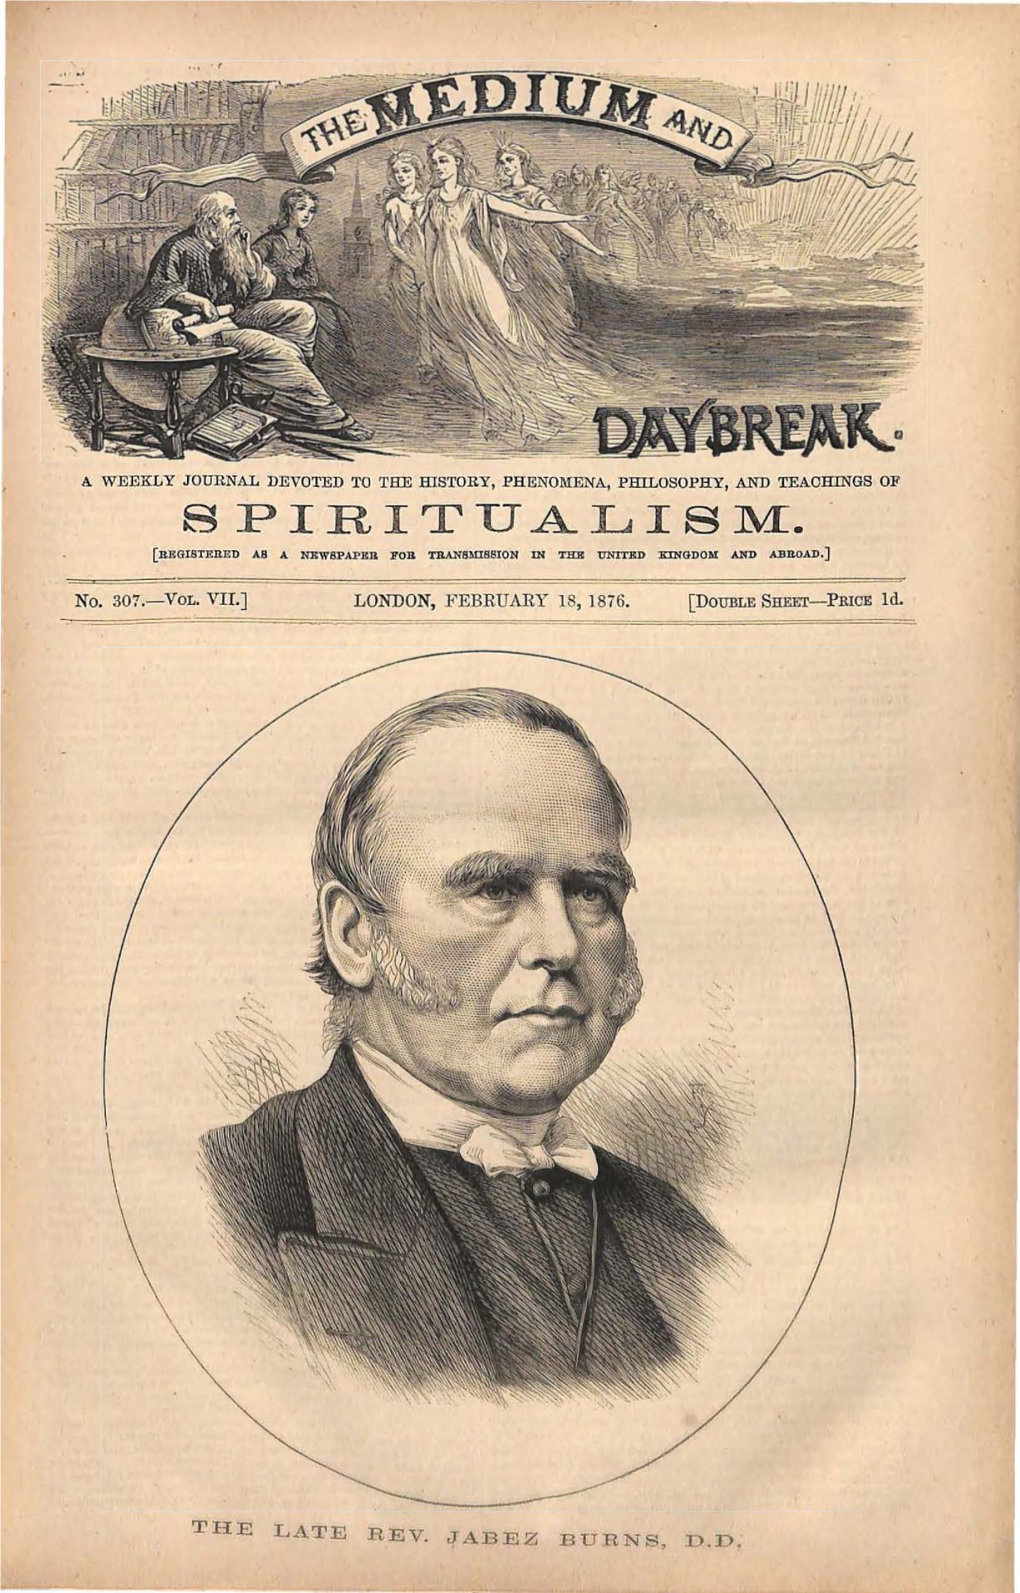 Spiritualism. [Registered As a Wkw8papk11 for Transmission in the United Kingdom and Abroad.]